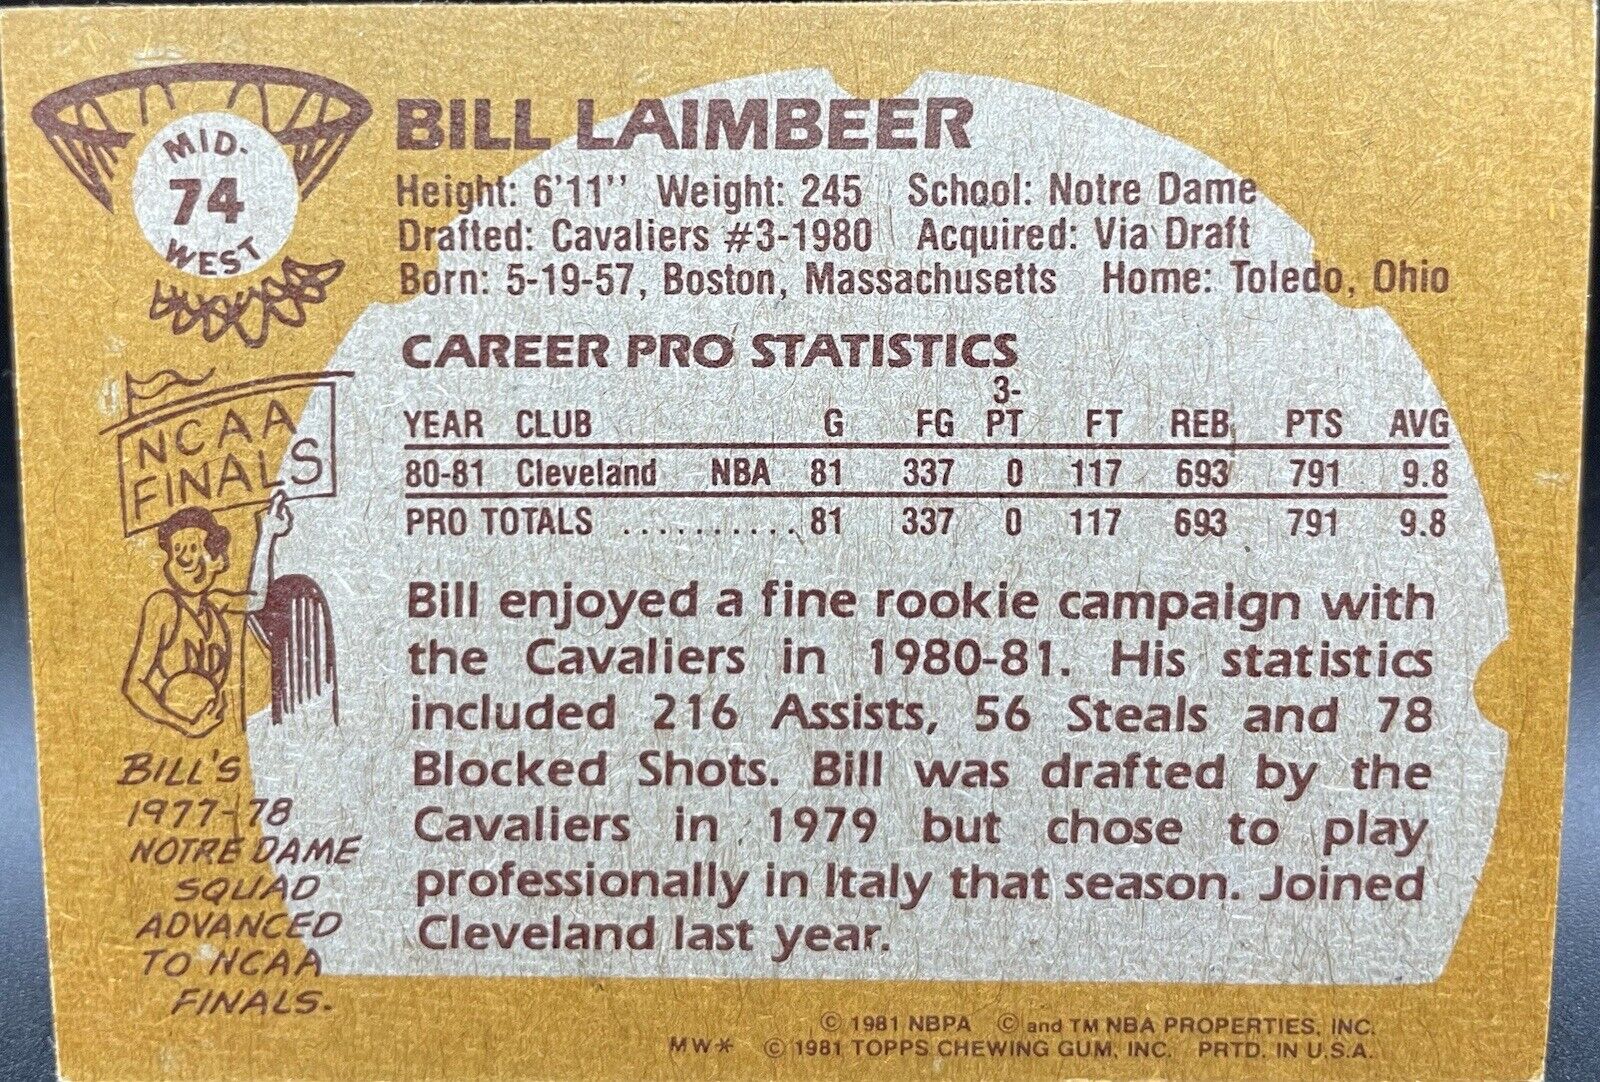 1981 Topps Mid West #74 Bill Laimbeer RC Cleveland Cavaliers 🔥🔥￼